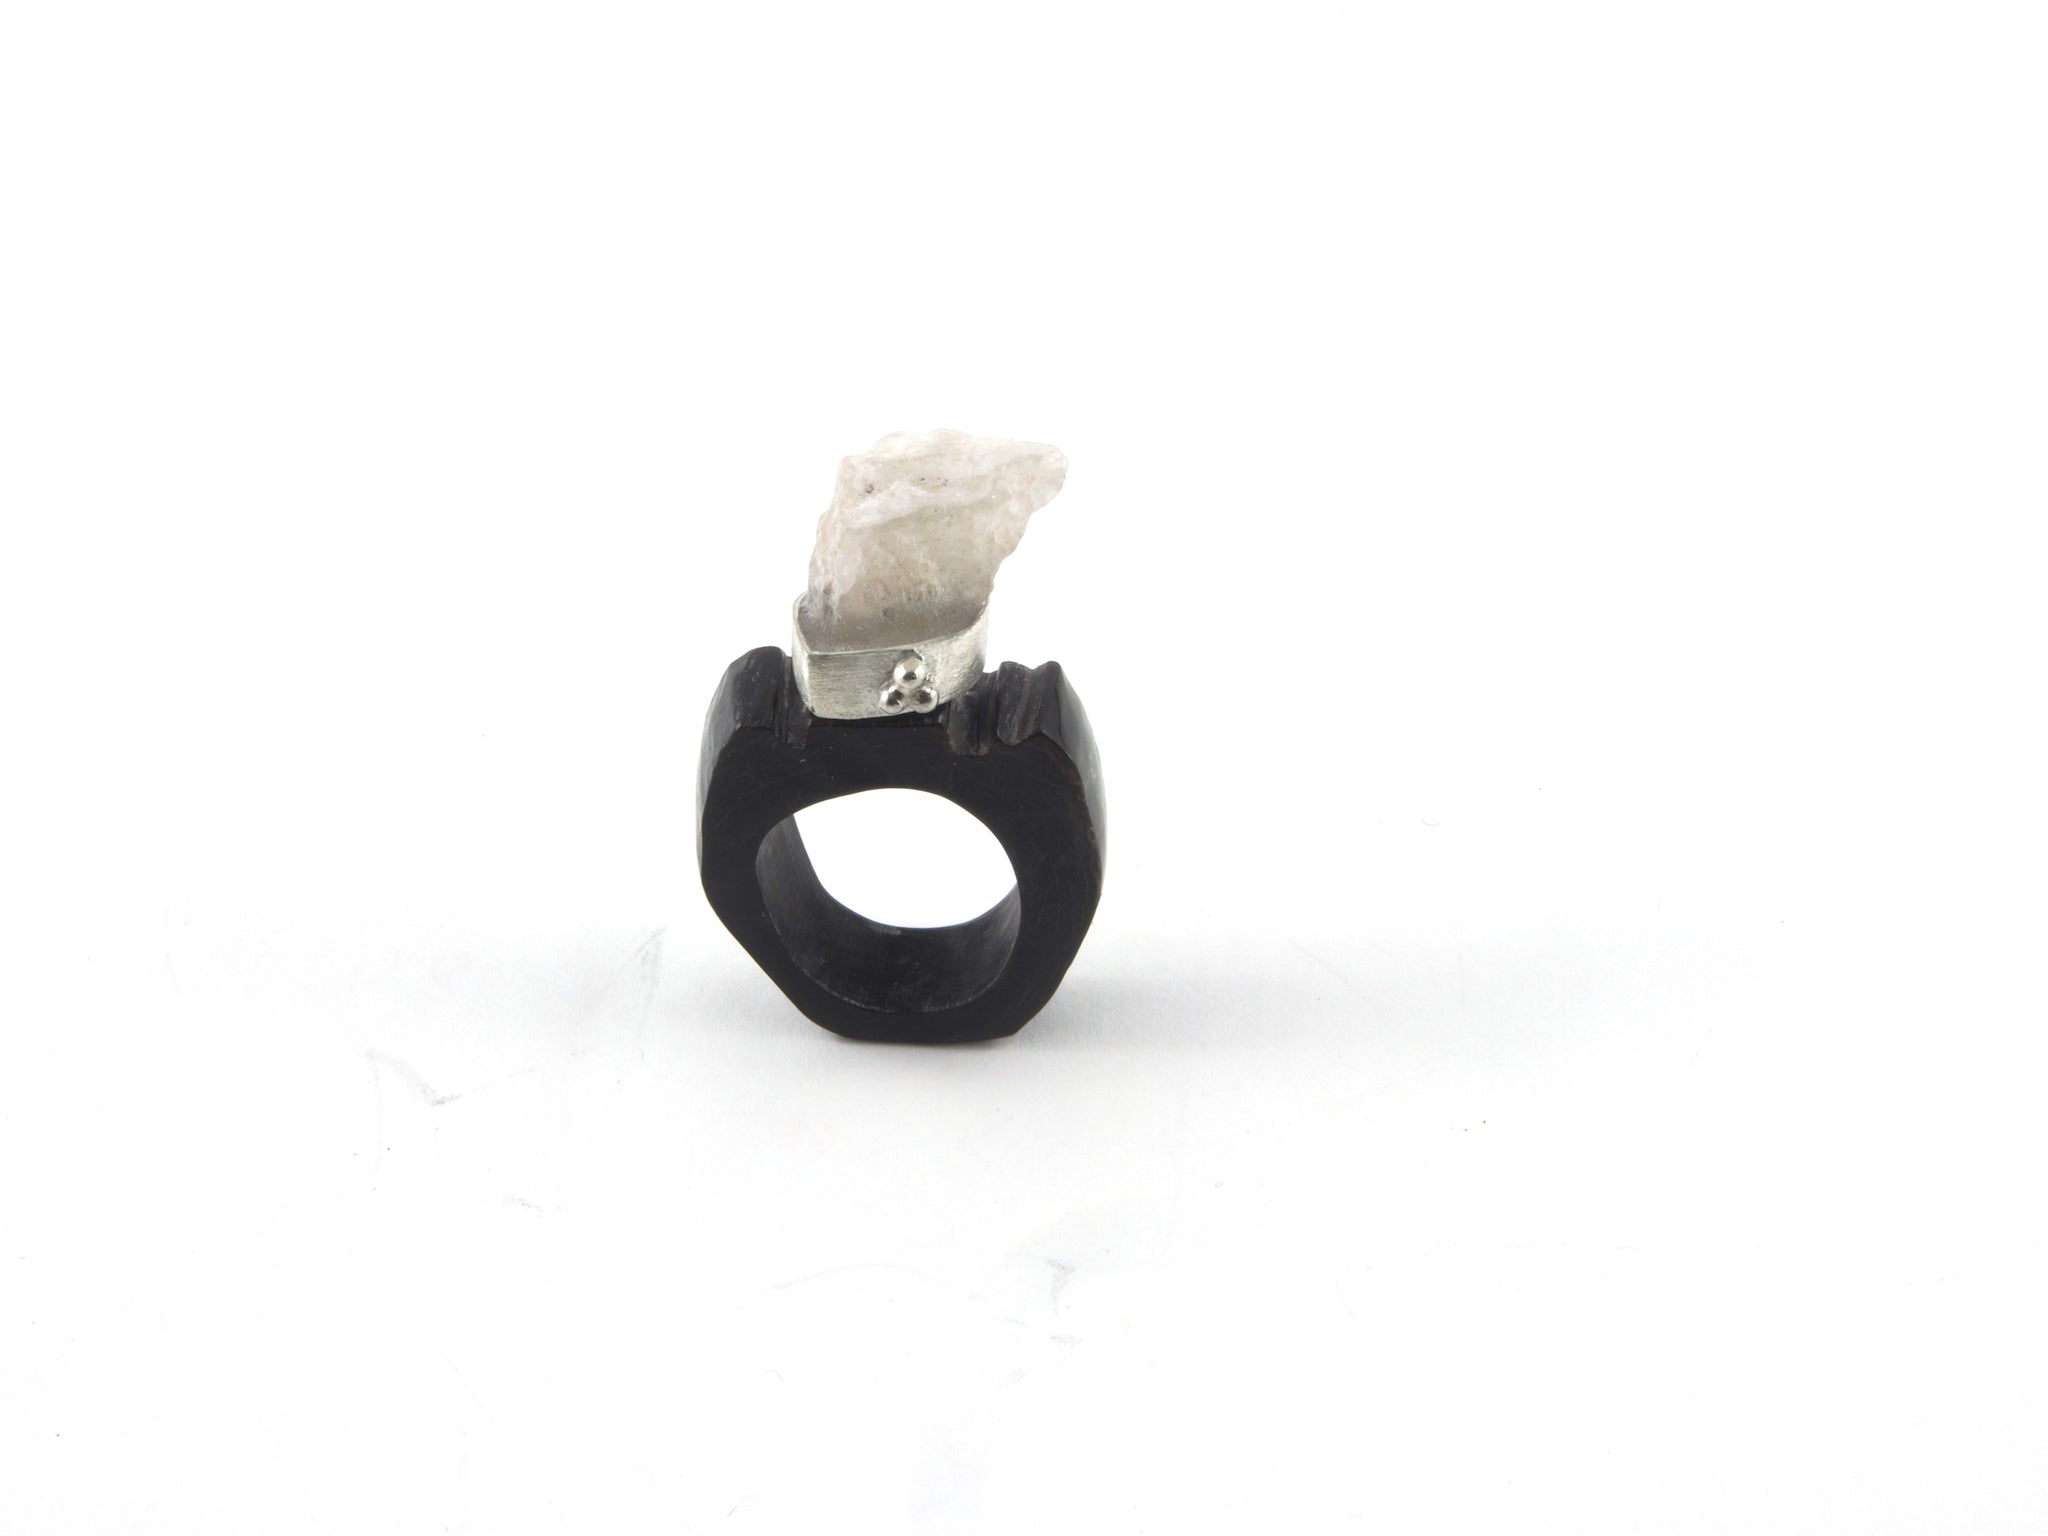 Ice-house ring at Gilded Encounters exhibition, Hadley's Orient Hotel 2018. Buffalo horn, quartz and sterling silver.